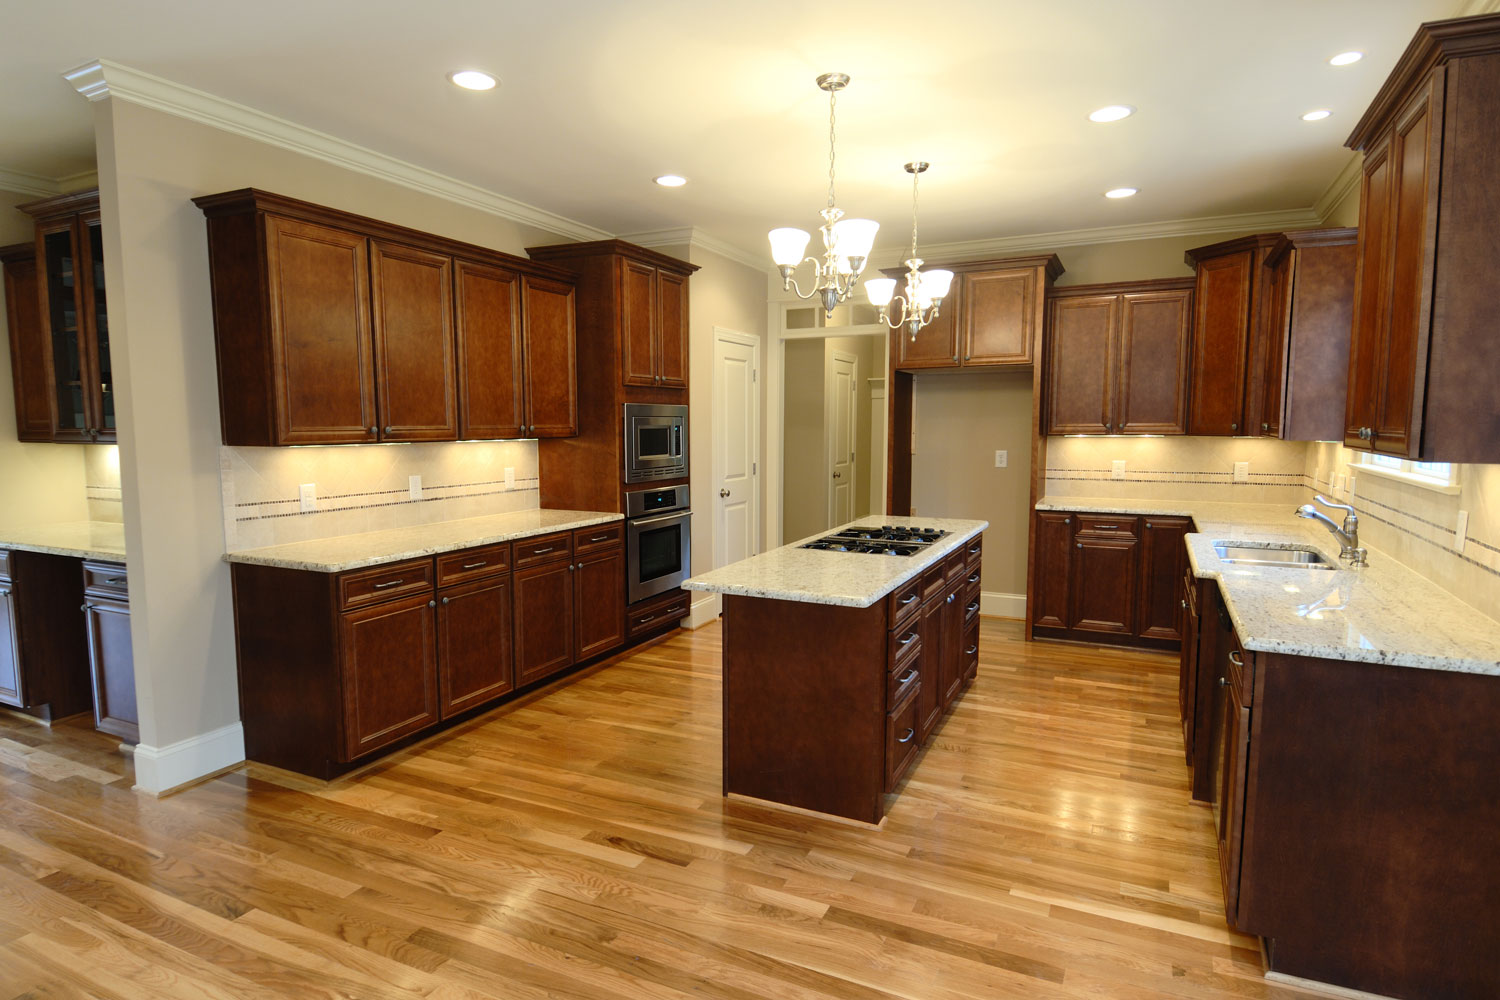 Ultra rustic classic kitchen with dark oak cabinets and cupboards matched with white marble countertop